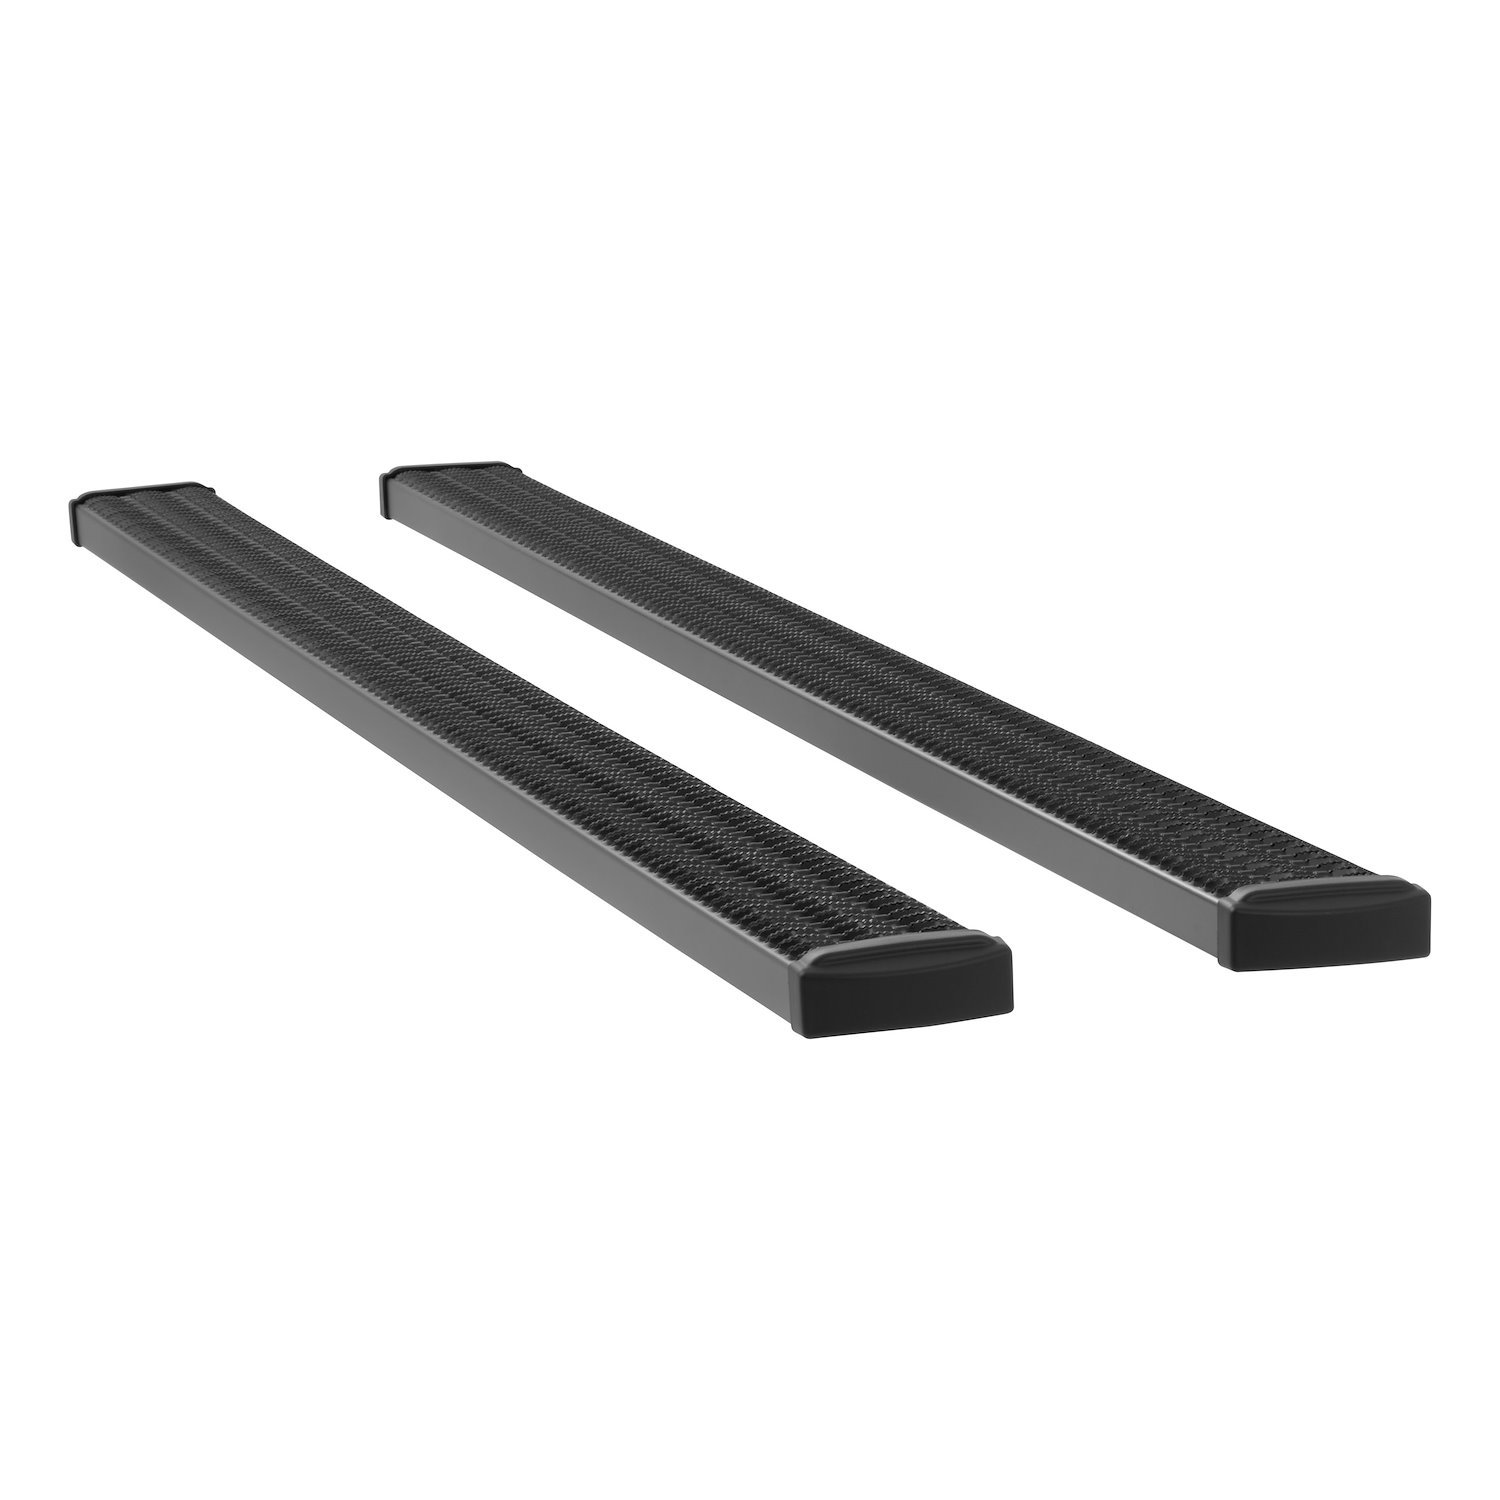 415125-401439 Grip Step 7 in. x 125 in. Aluminum Wheel-to-Wheel Running Boards Fits Select Ram 2500